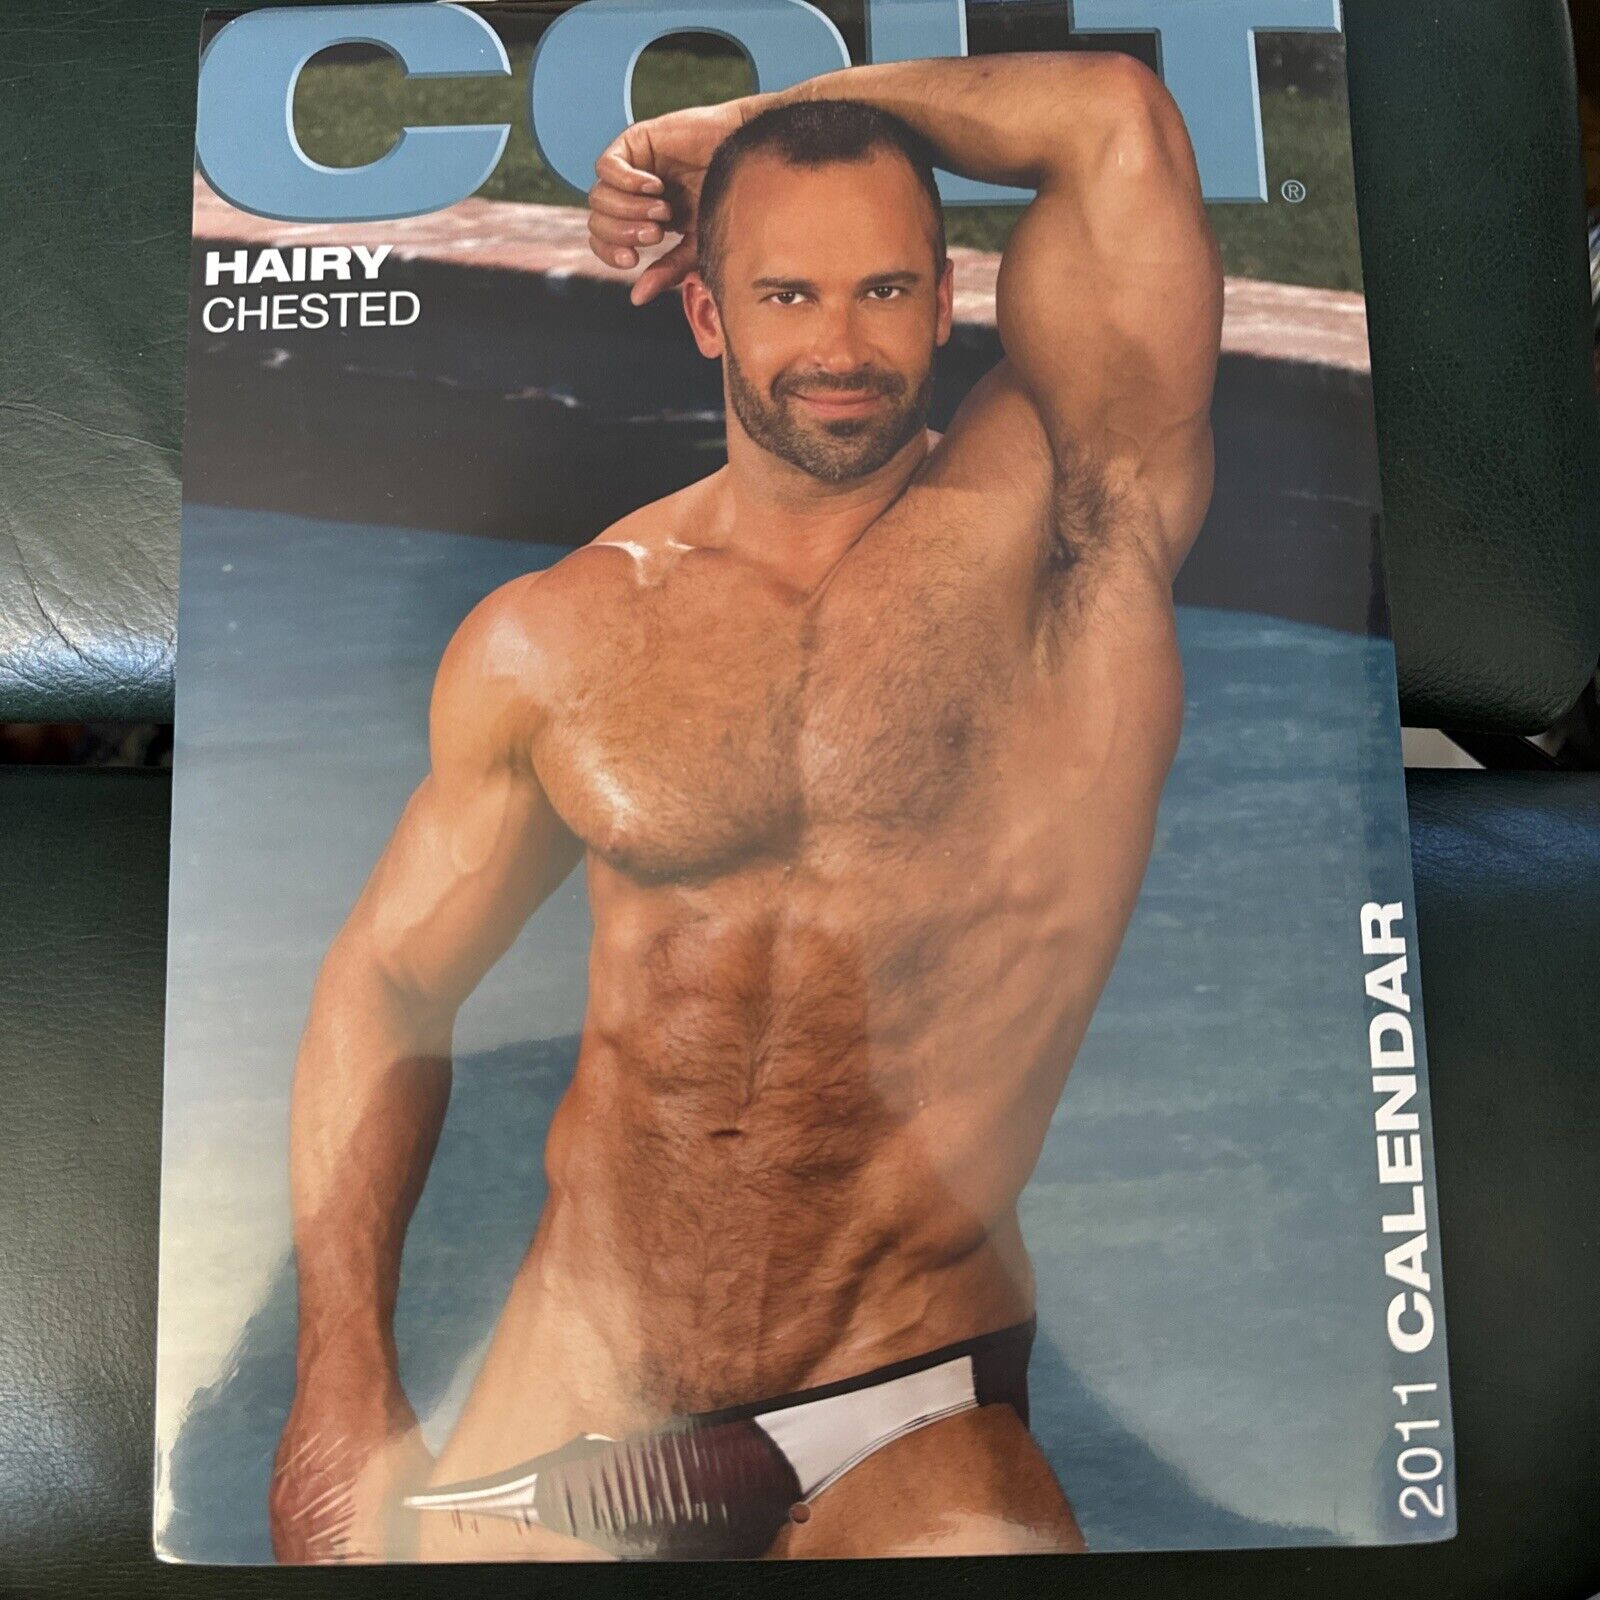 COLT Hairy Chested Men CALENDAR 2011 GAY Art Photo Male Beefcake Sealed Poster